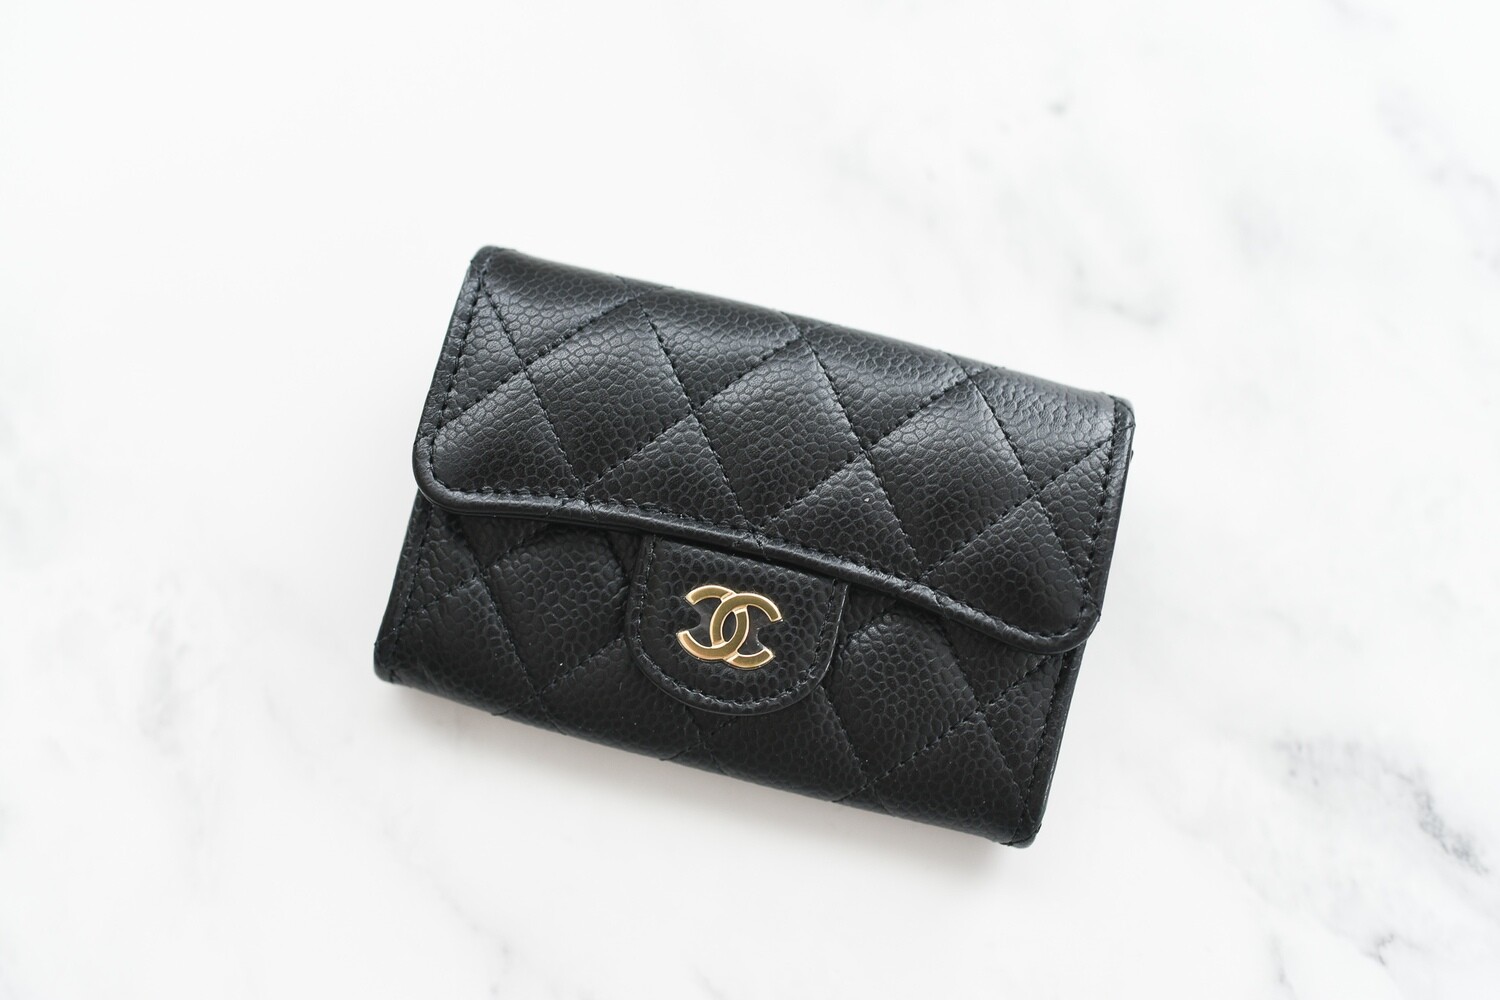 Chanel SLG Snap Card Holder, Black Caviar Leather with Gold Hardware, New  in Box GA003